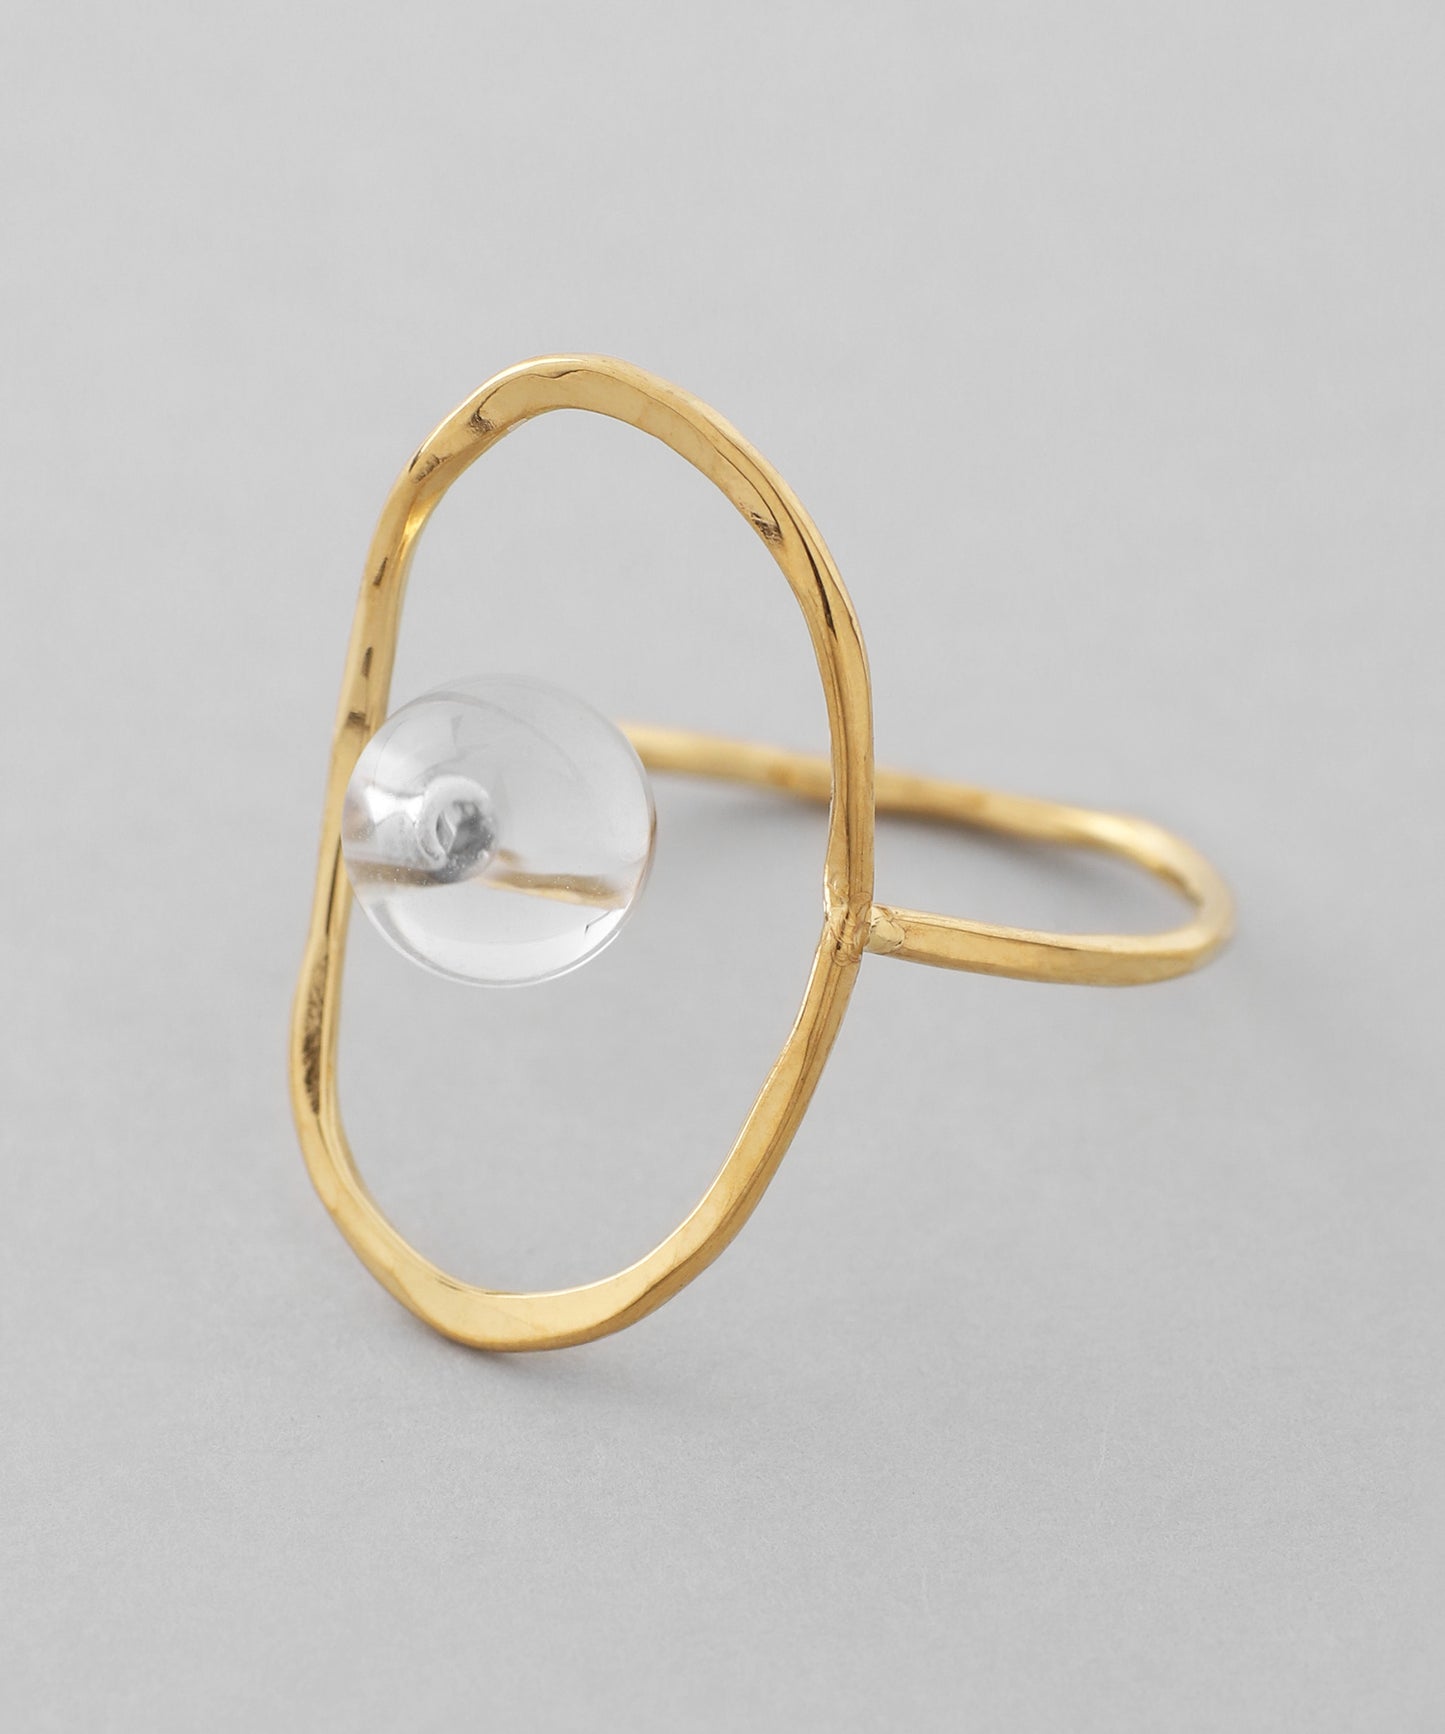 【Stainless Seel IP】Crystal × Oval Frame Ring